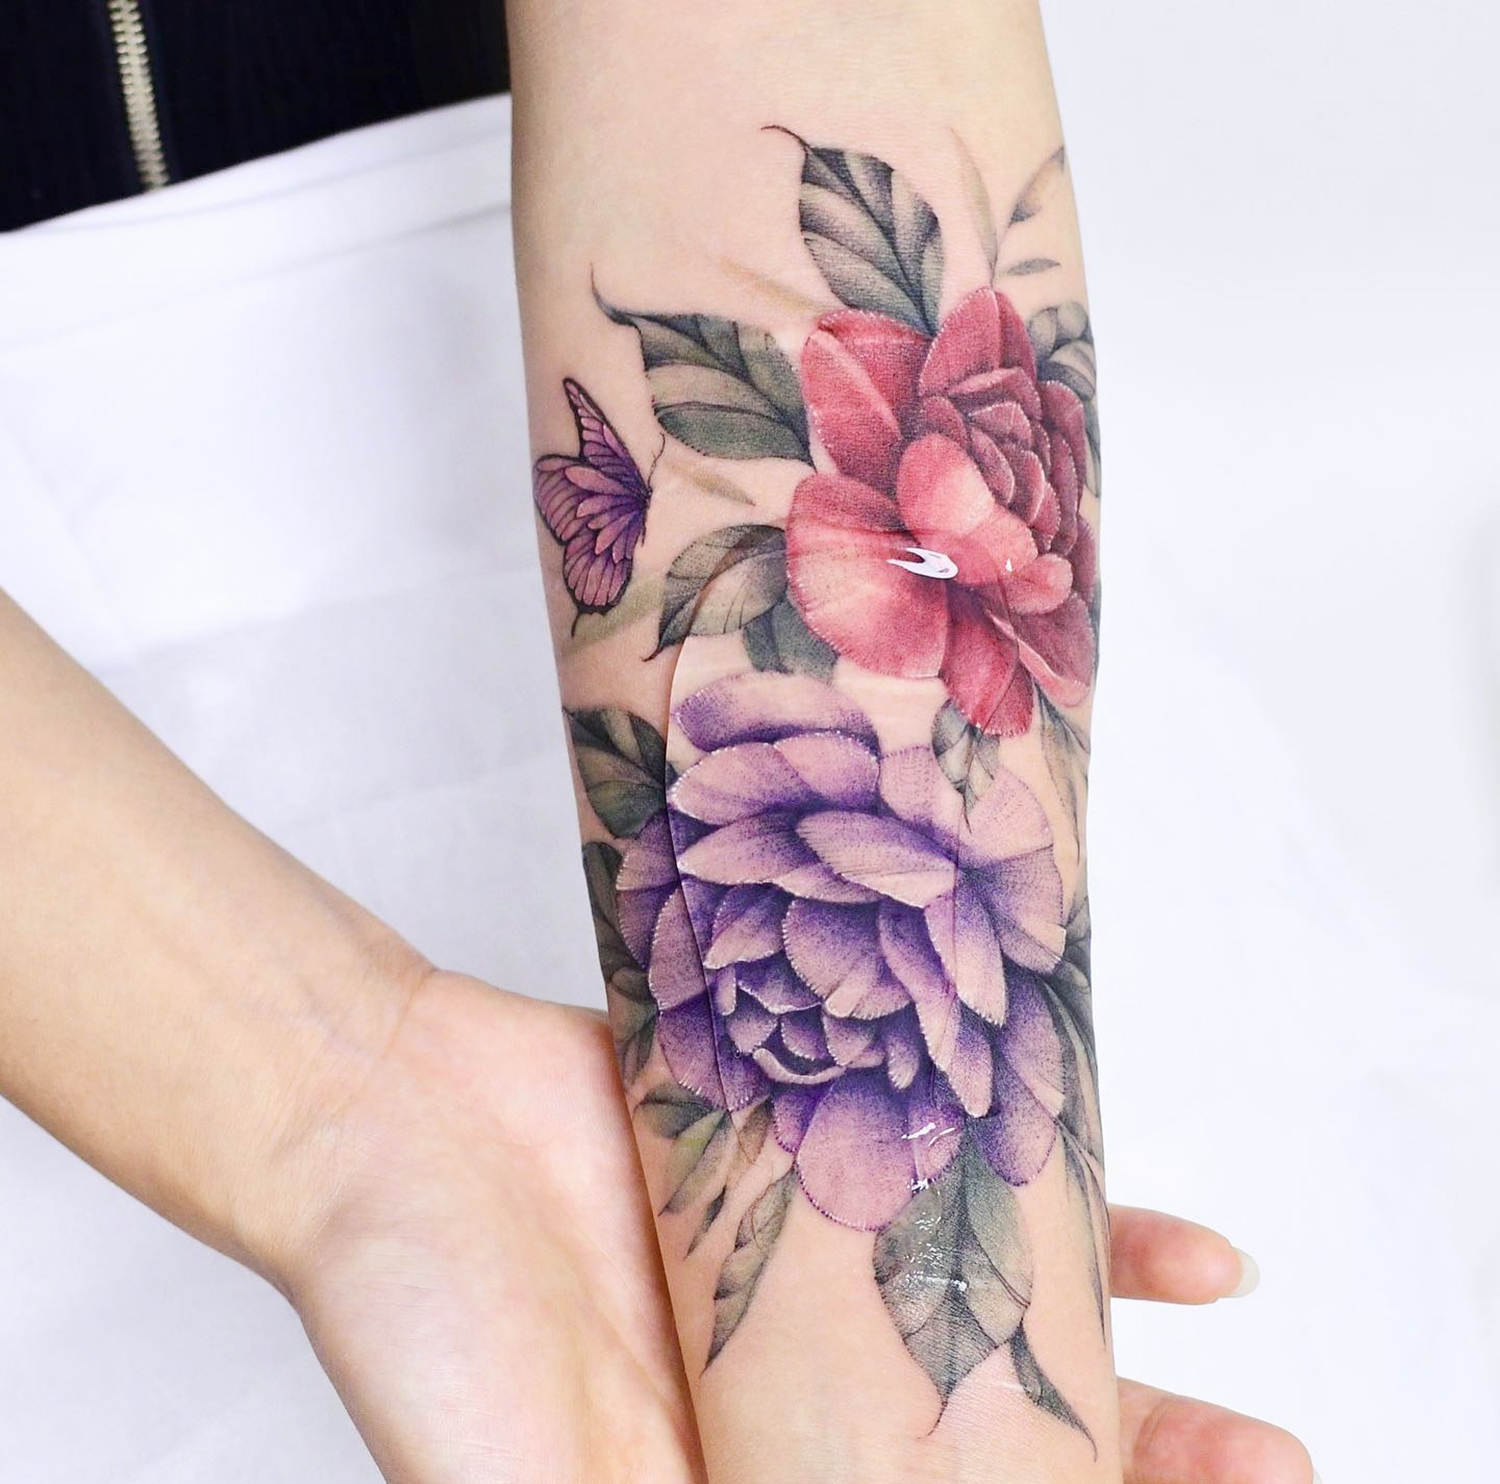 Tattoo cover up over suicidal scars on arm, healing tattoo